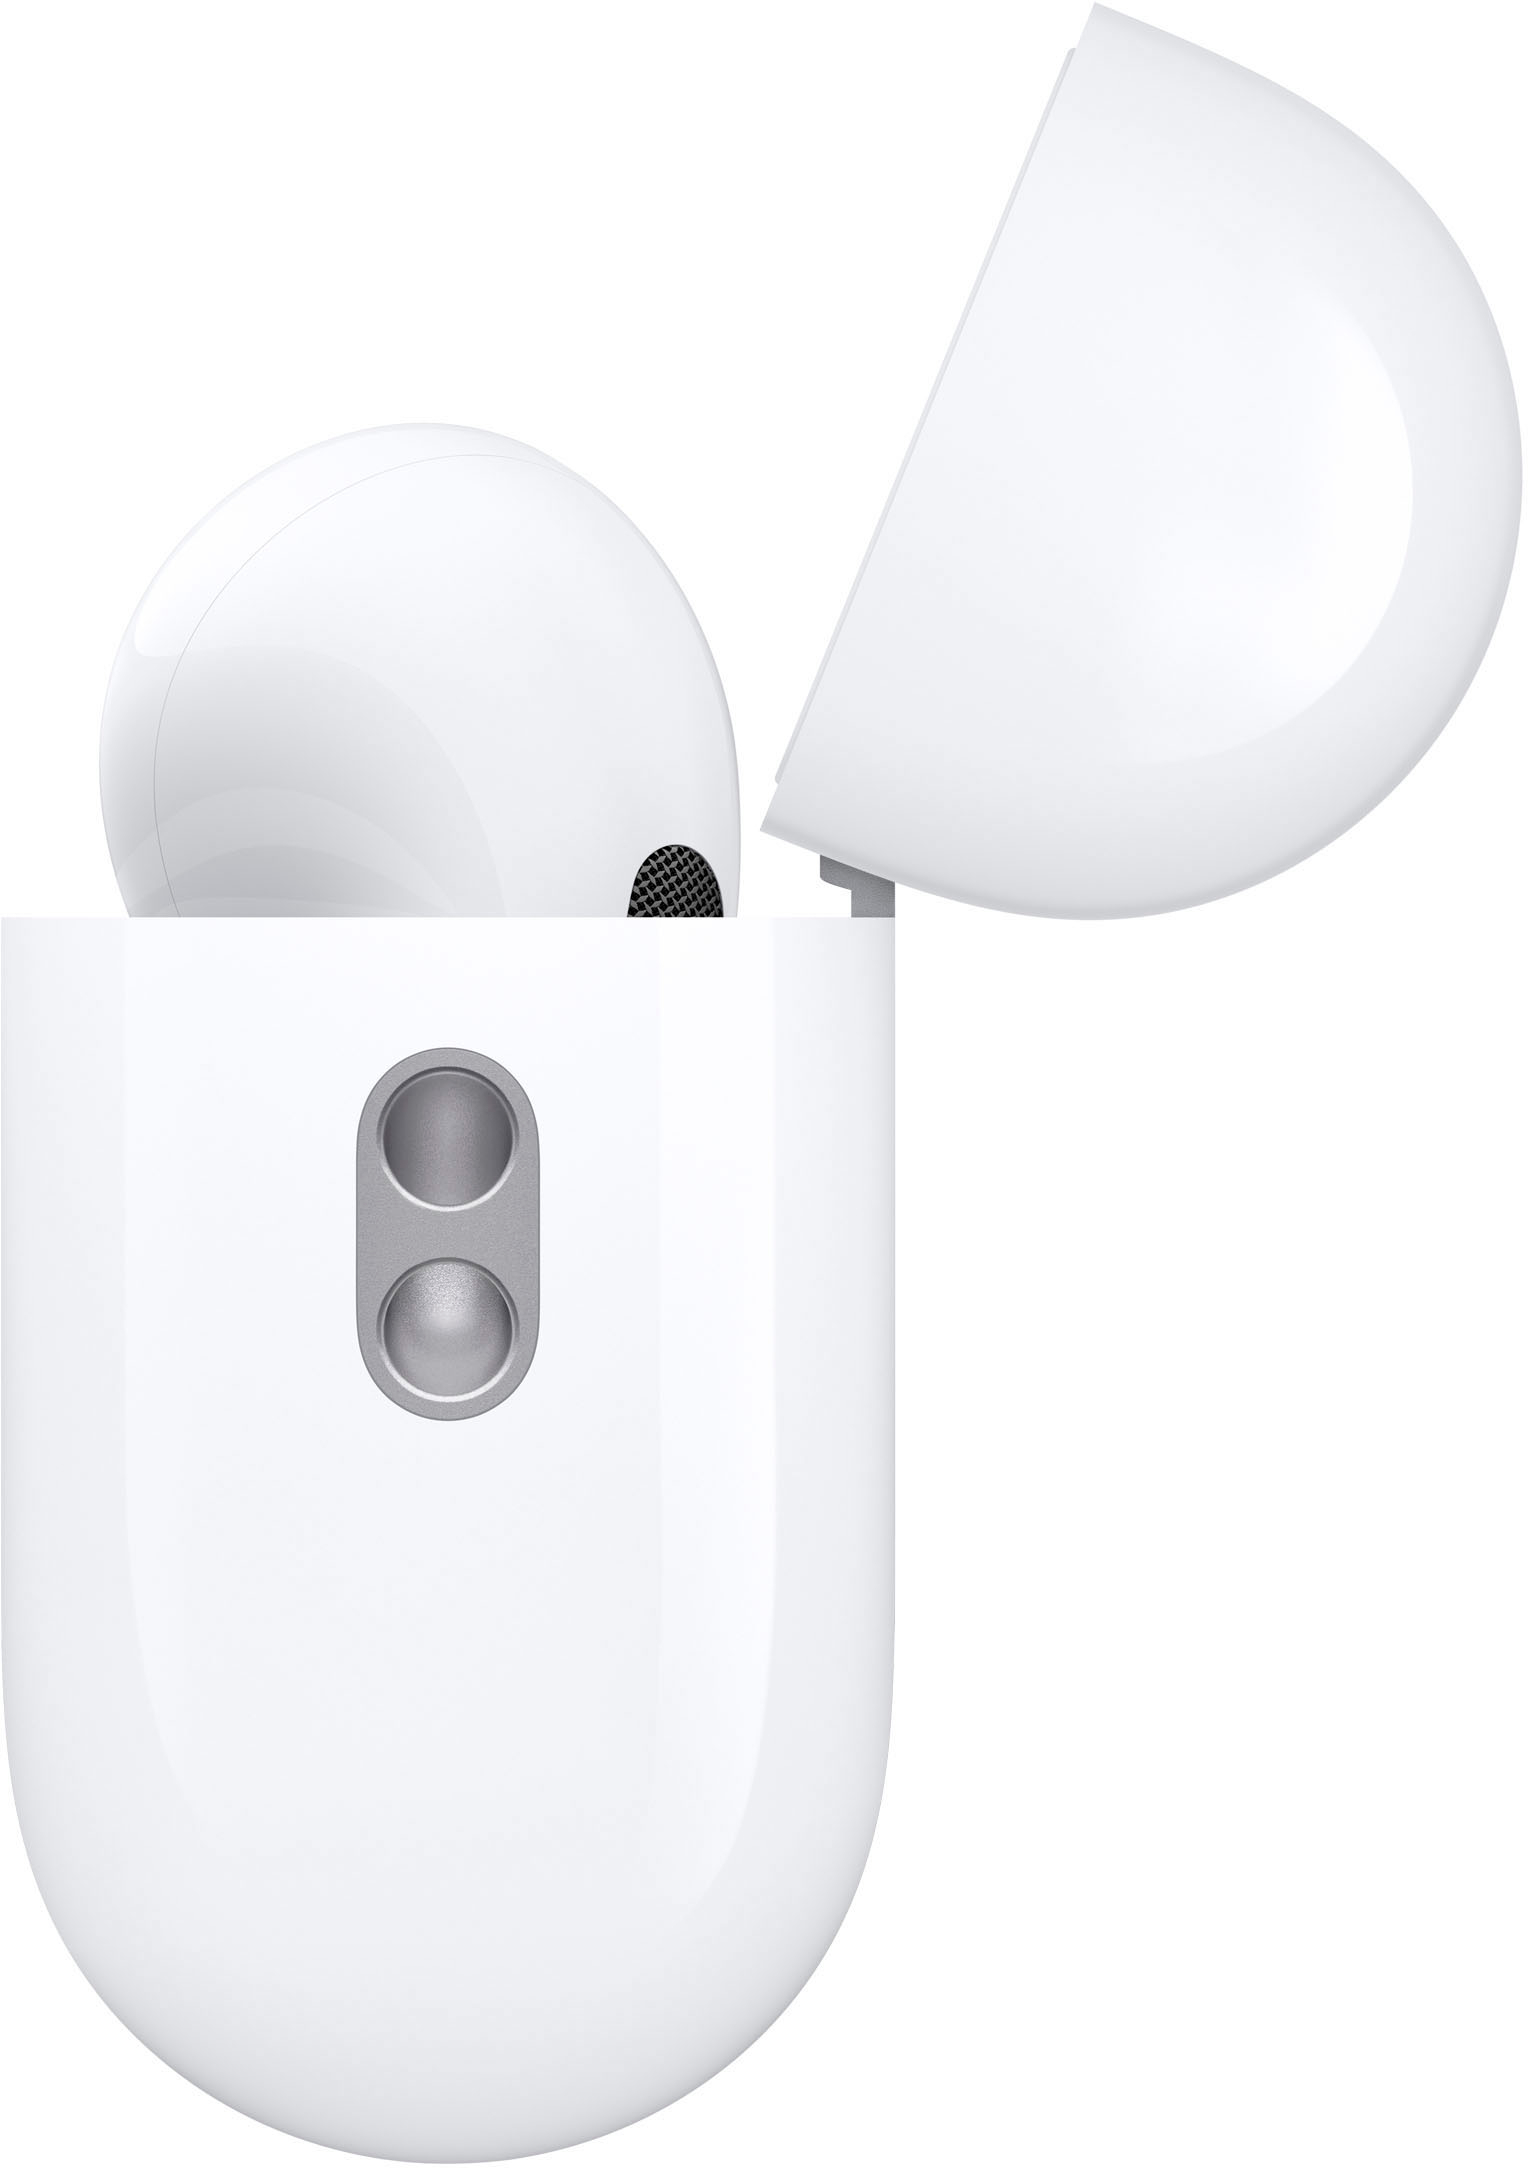 Apple Geek Squad Certified Refurbished AirPods Pro (2nd generation